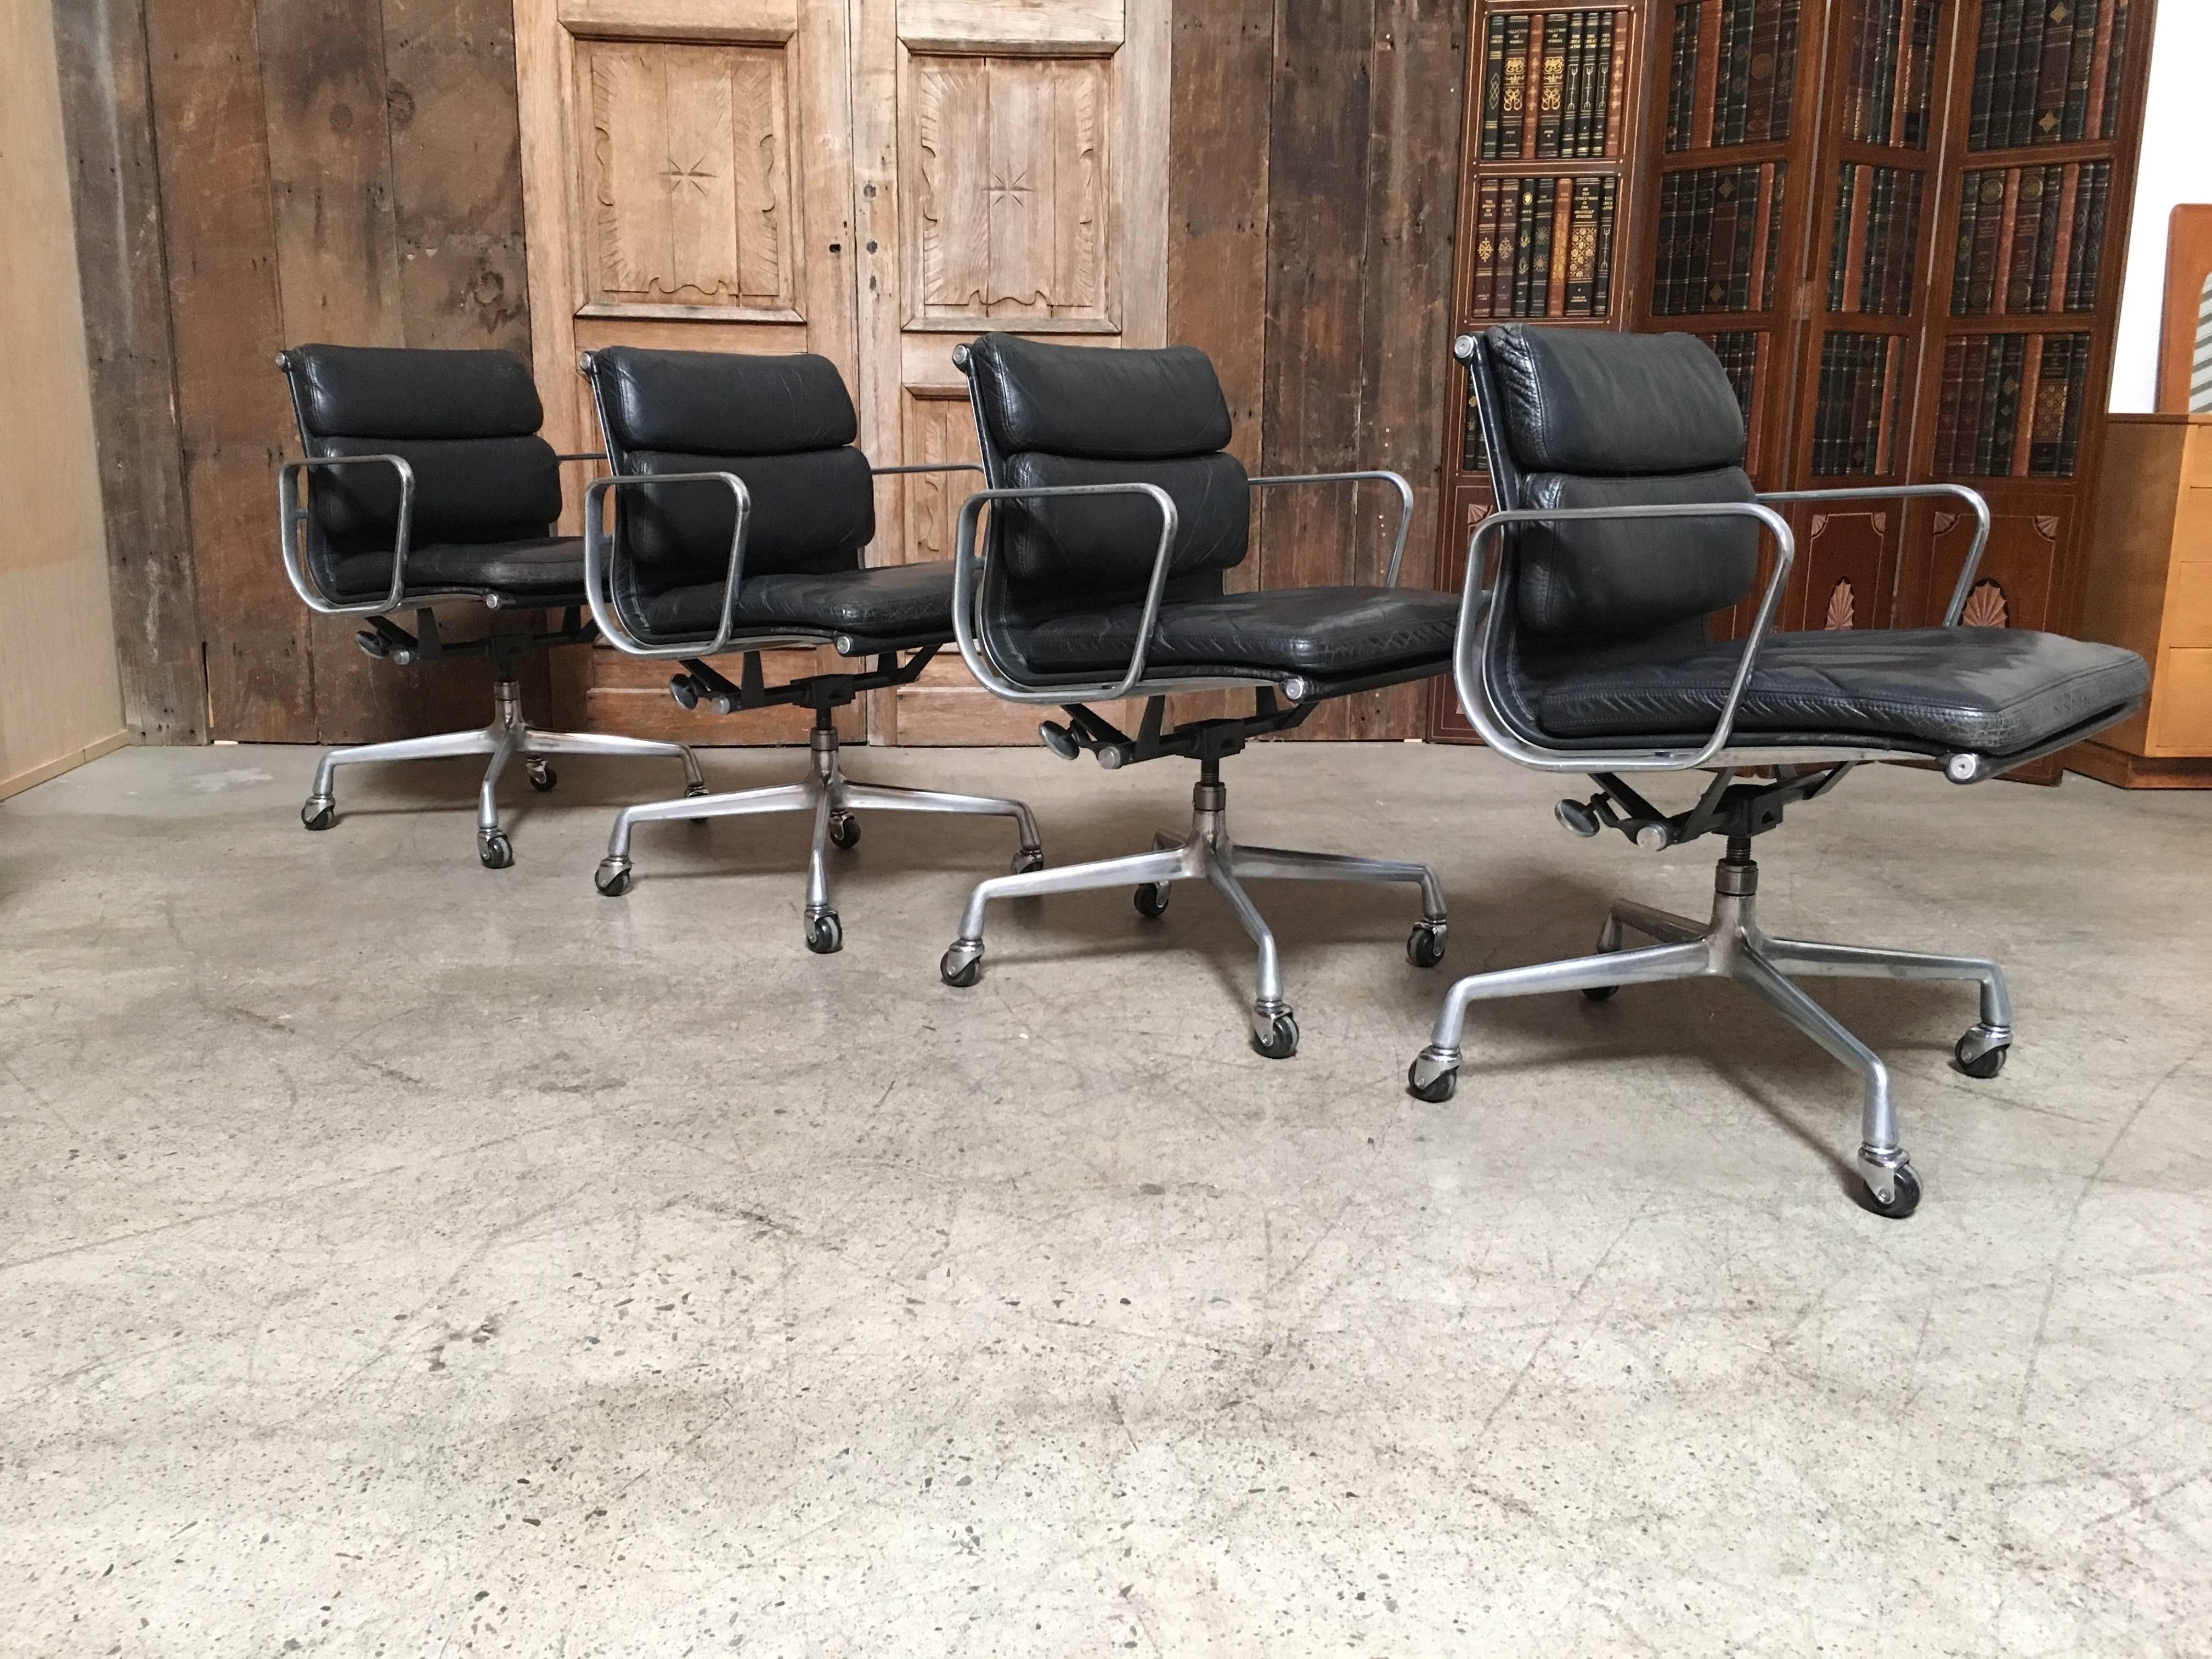 We have four of these soft pad aluminium group management desk chairs available designed by Charles and Ray Eames for Herman Miller. Featuring the original vintage black leather upholstery over four-star aluminium base and frame.